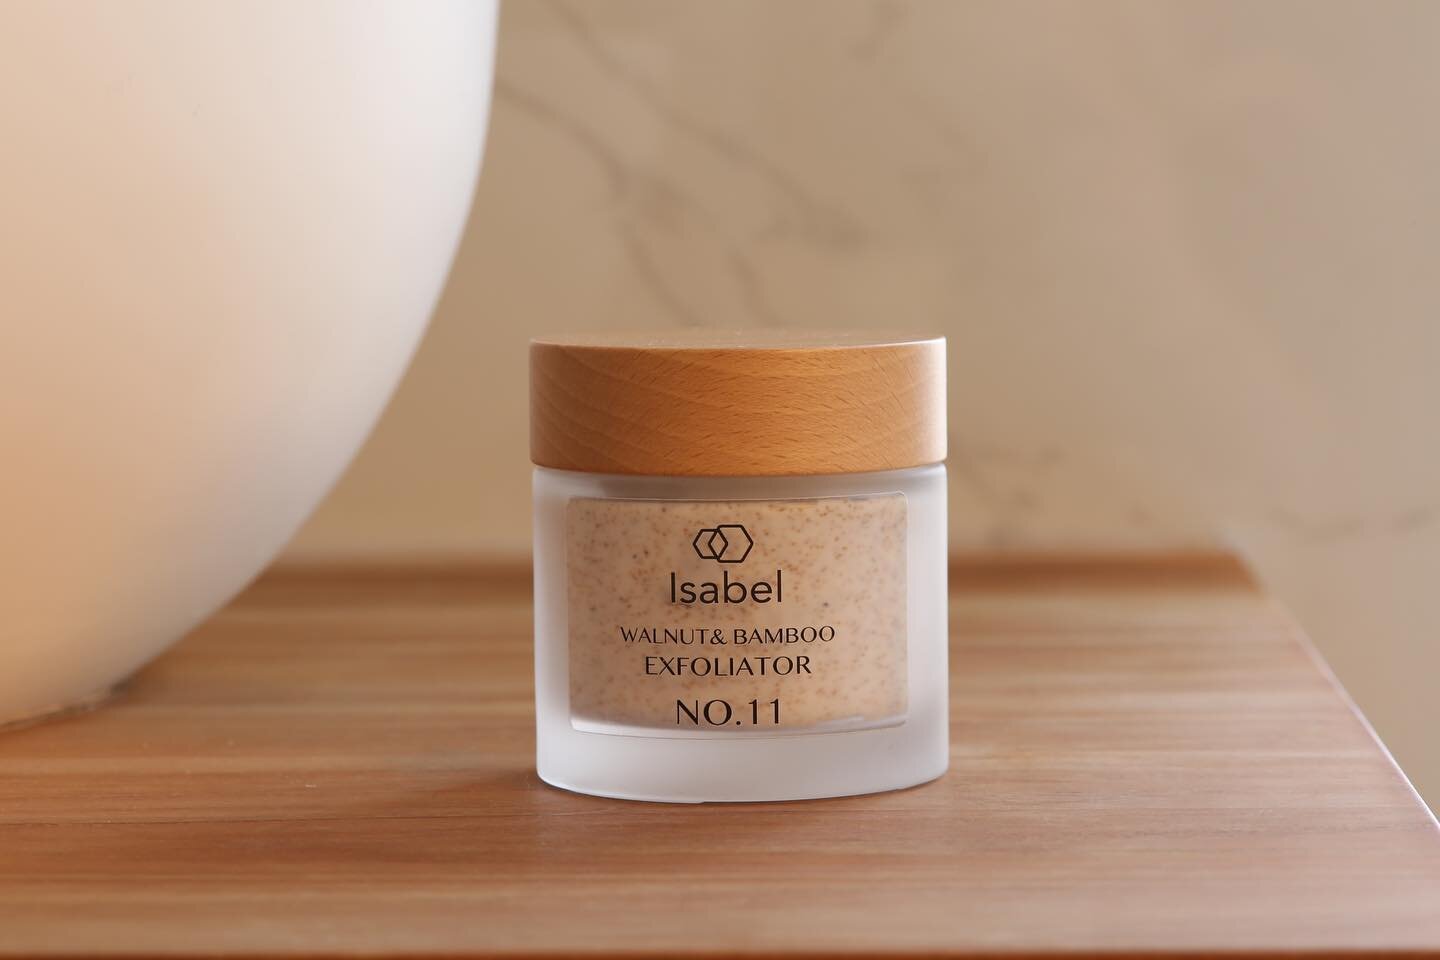 NEW product! After it&rsquo;s final recipe tweaks &amp; lab test reports,  I&rsquo;m delighted to release No.11 Walnut &amp; Bamboo Exfoliator. Made with natural ingredients to leave your skin glowing. Just in time to get some sunshine! ☀️ The perfec